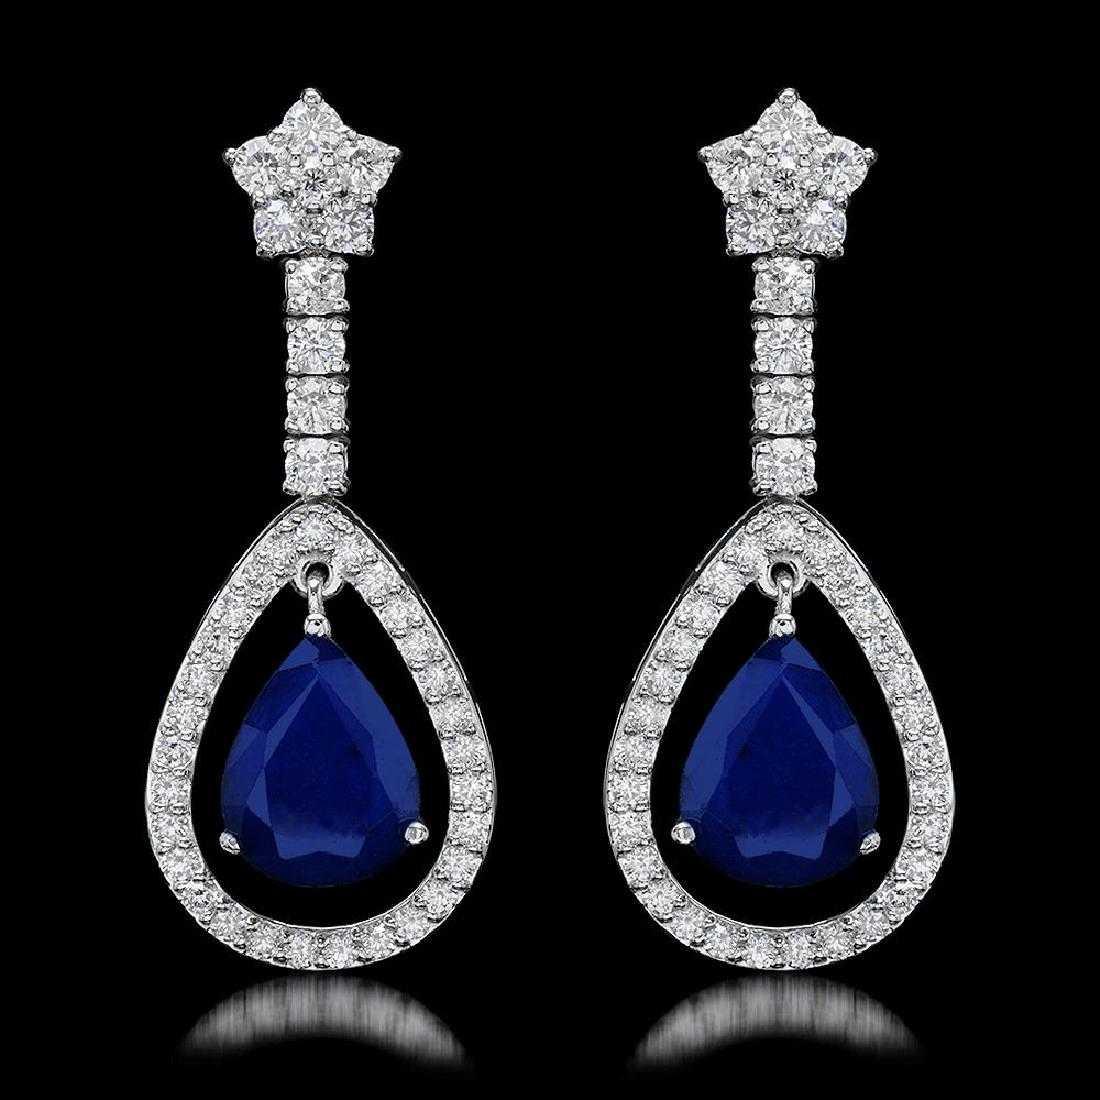 14K White Gold 6.37ct Sapphire and 2.68ct Diamond Earrings